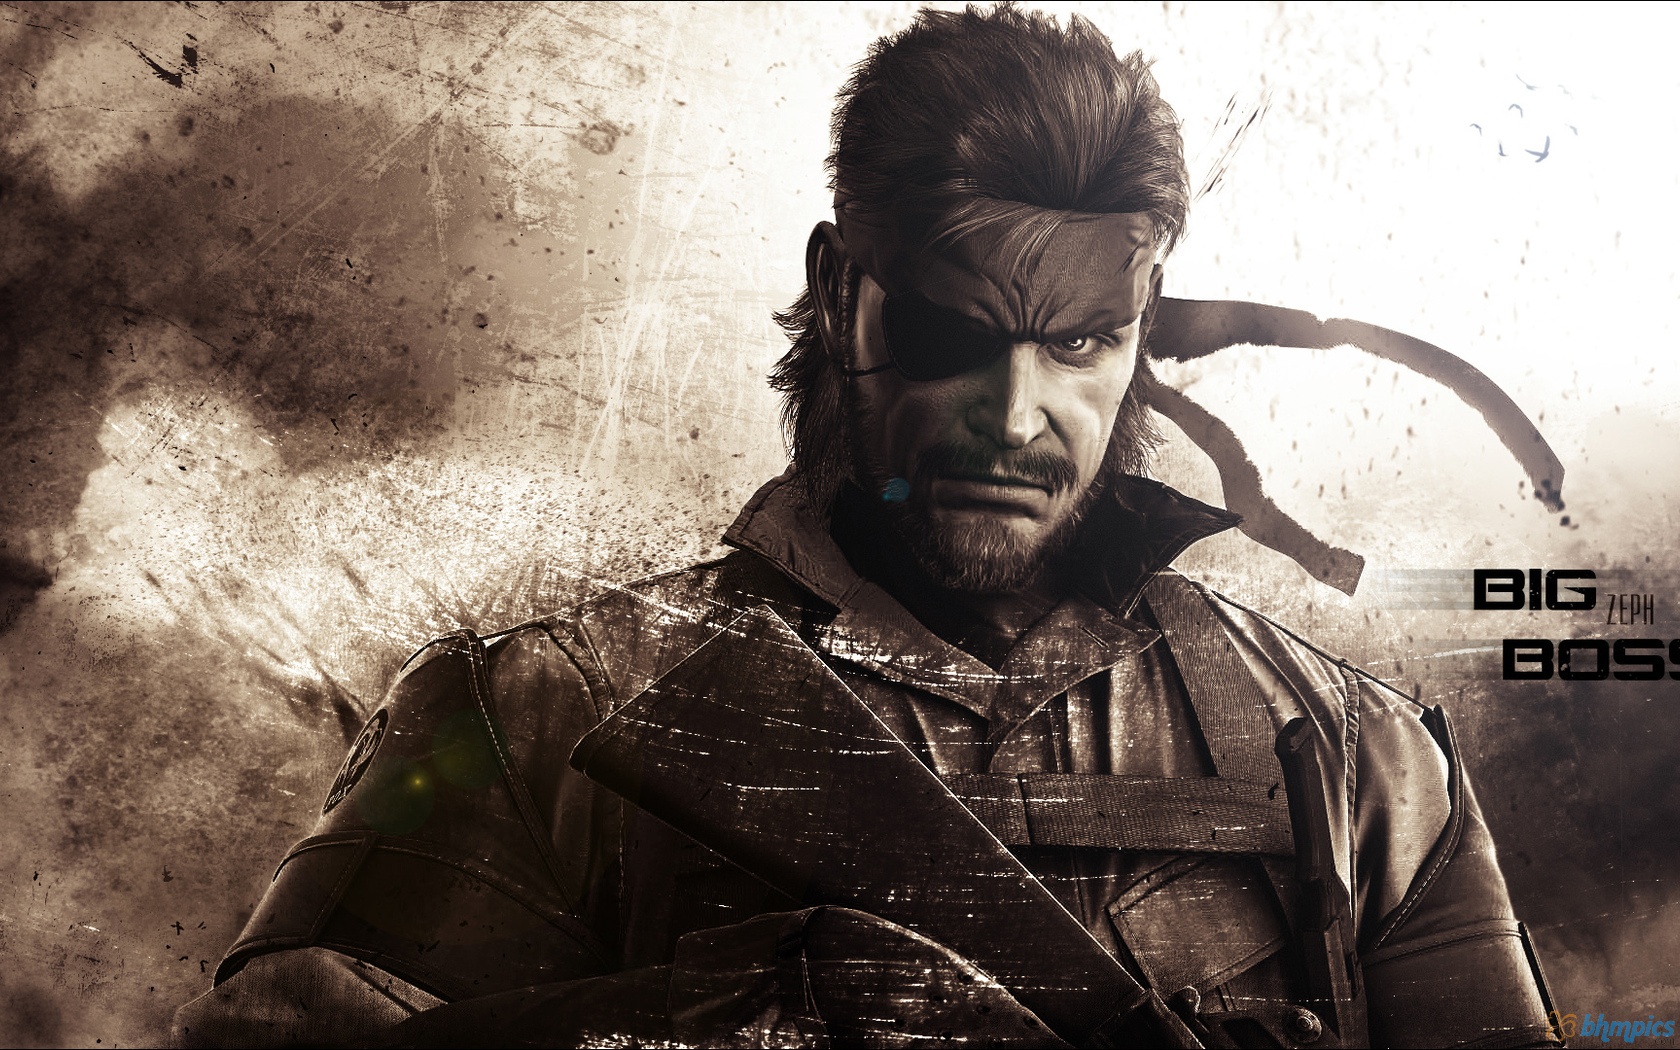 Free Download Metal Gear Solid V Ground Zeroes Wallpapers Hd Desktop And Mobile 1920x1080 For